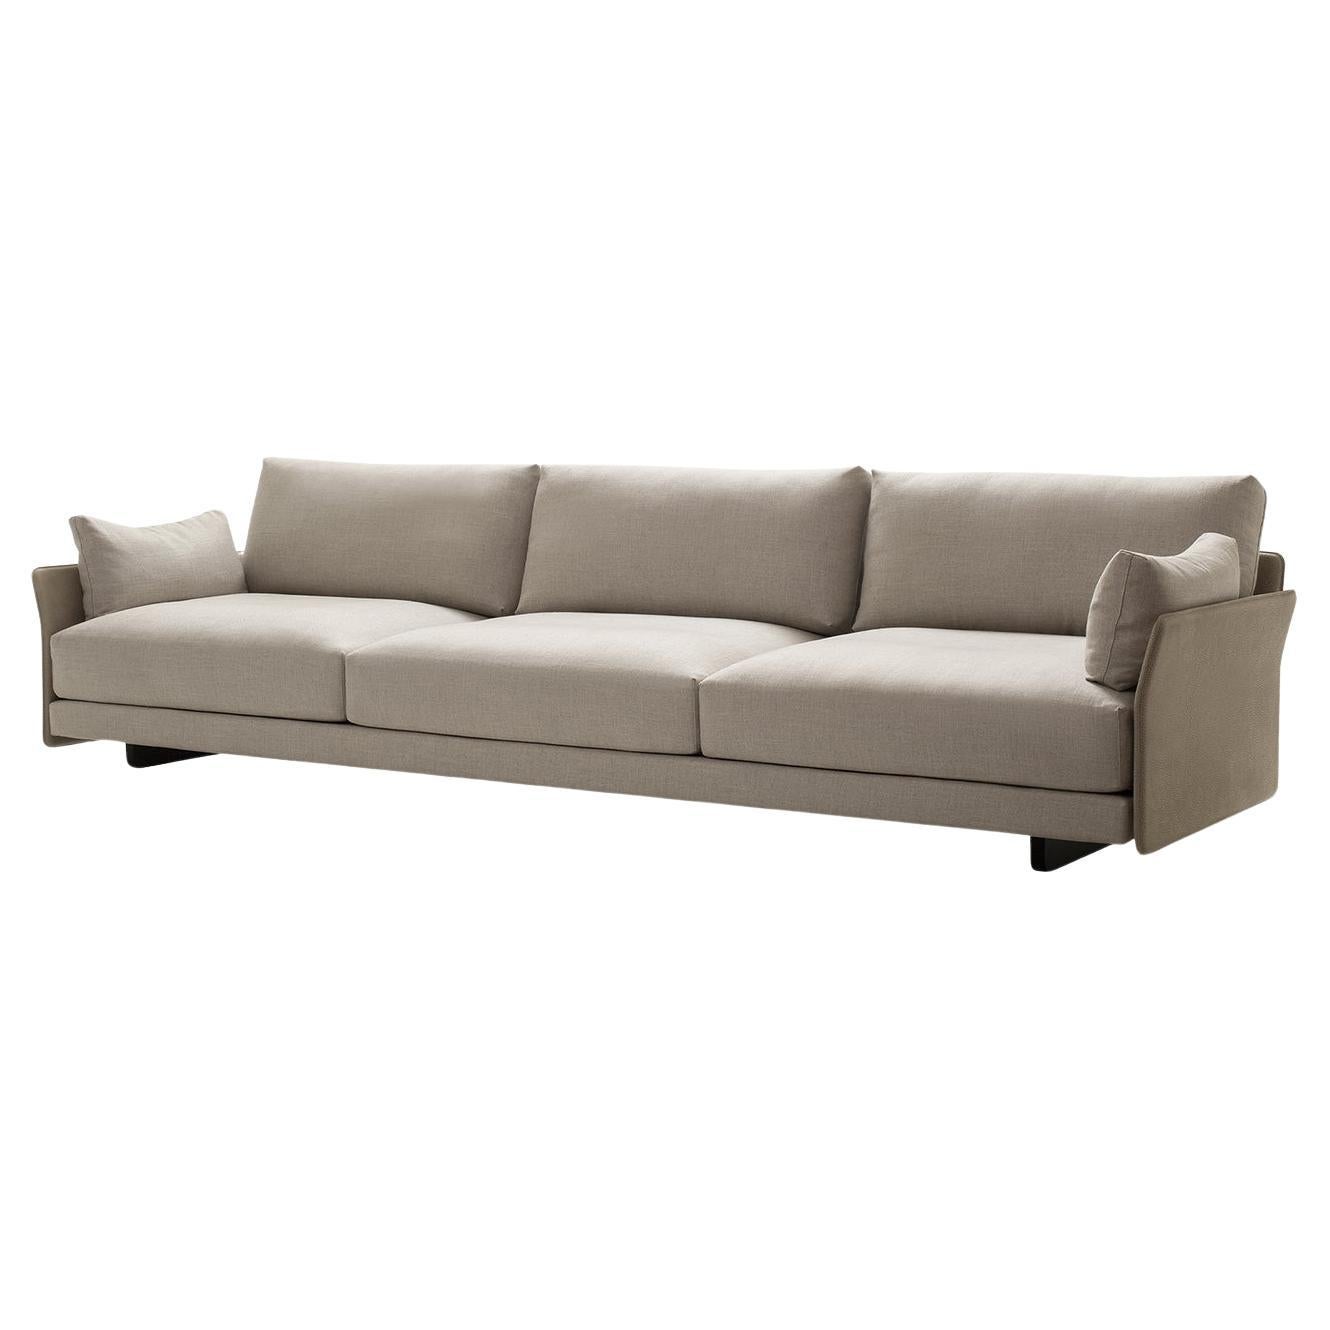 Murphy 3-Seater Beige Sofa For Sale